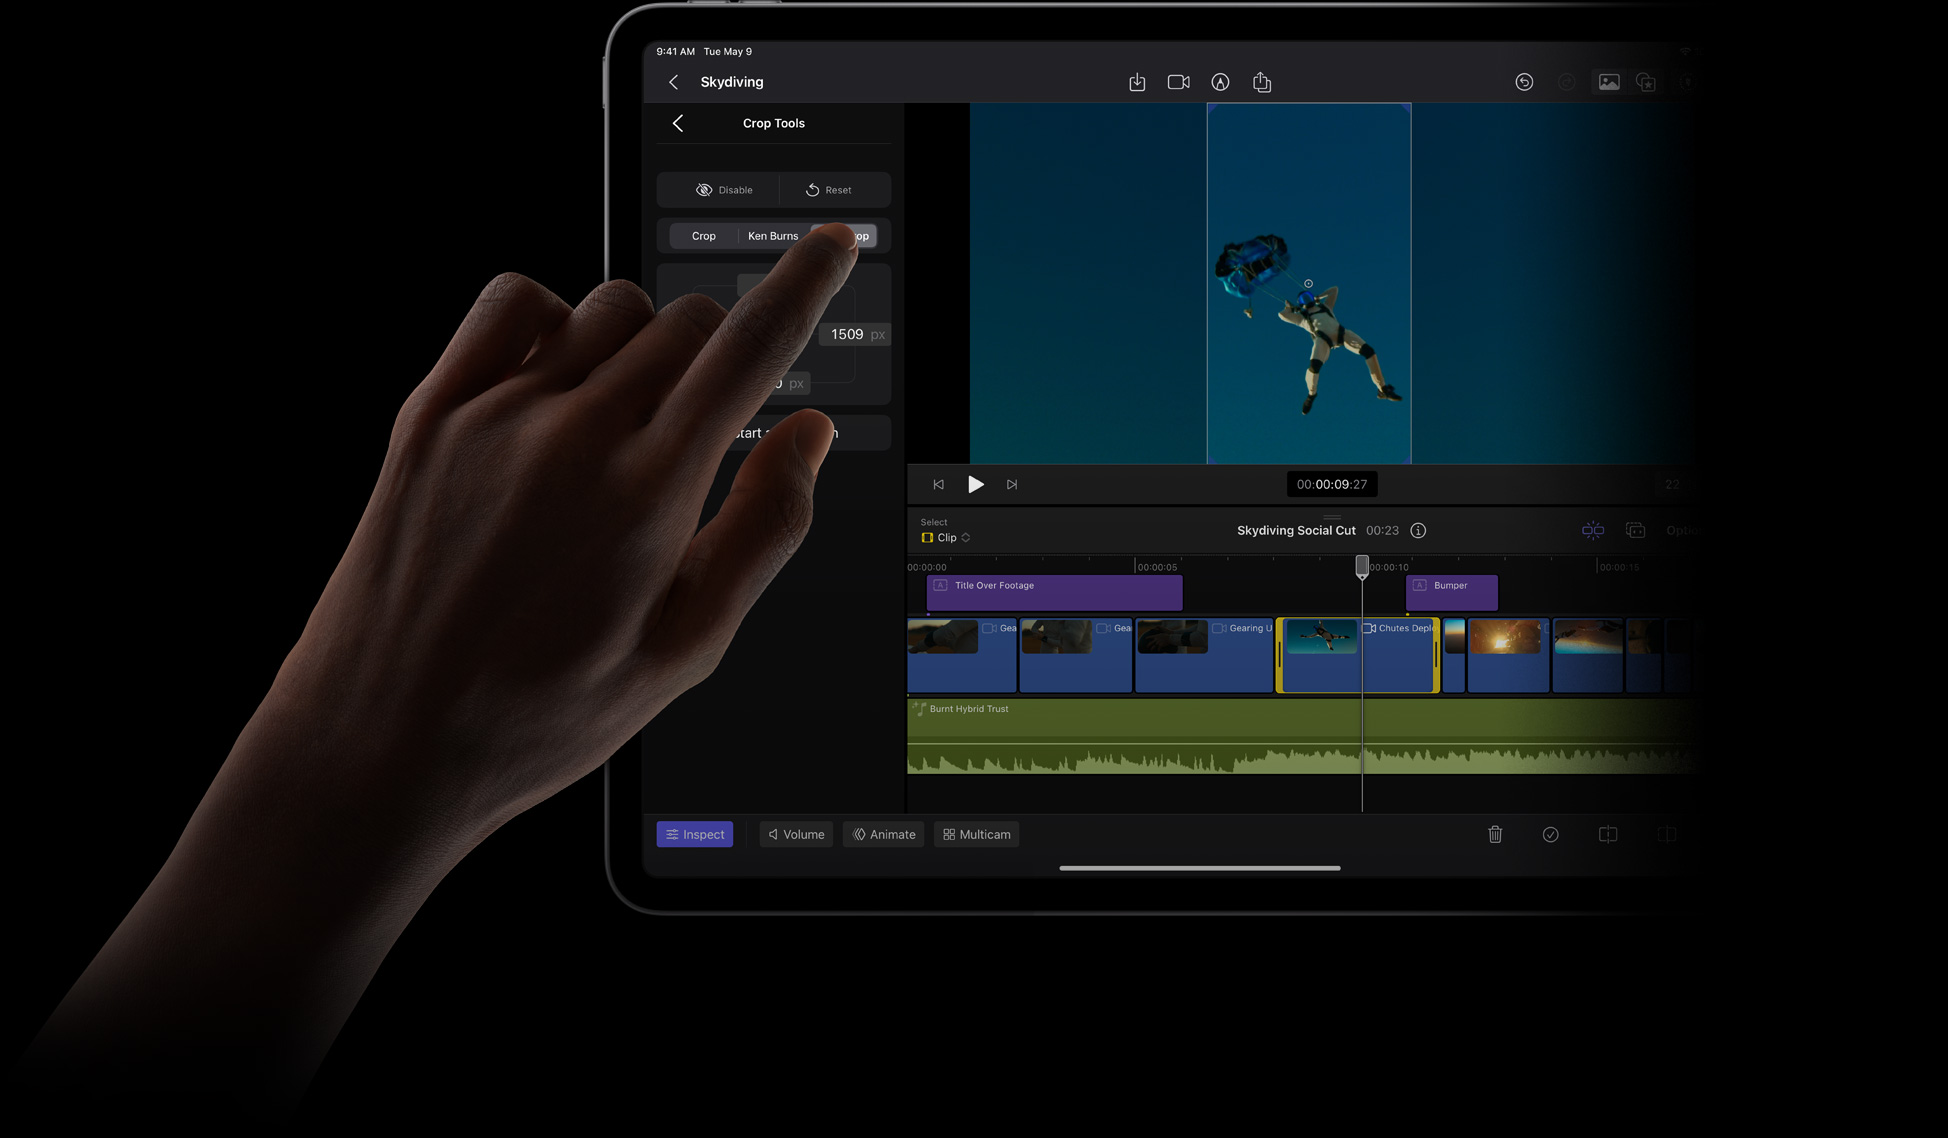 Finger touching iPad Pro display to select an item from the Crop Tools menu in Final Cut Pro.